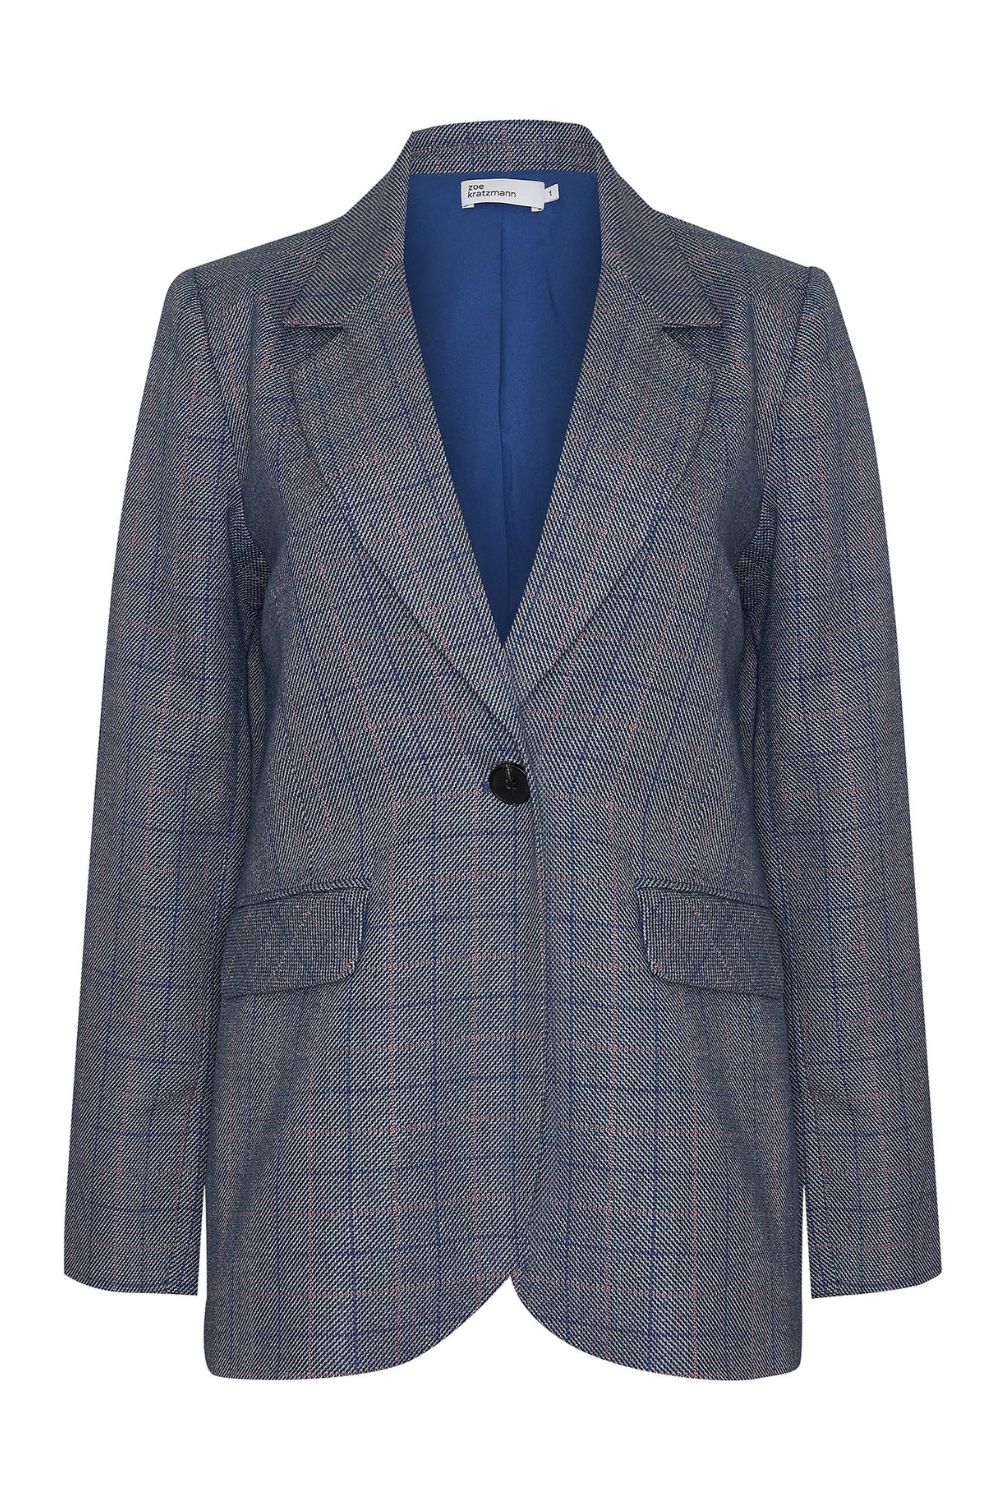 Scout jacket - sapphire check